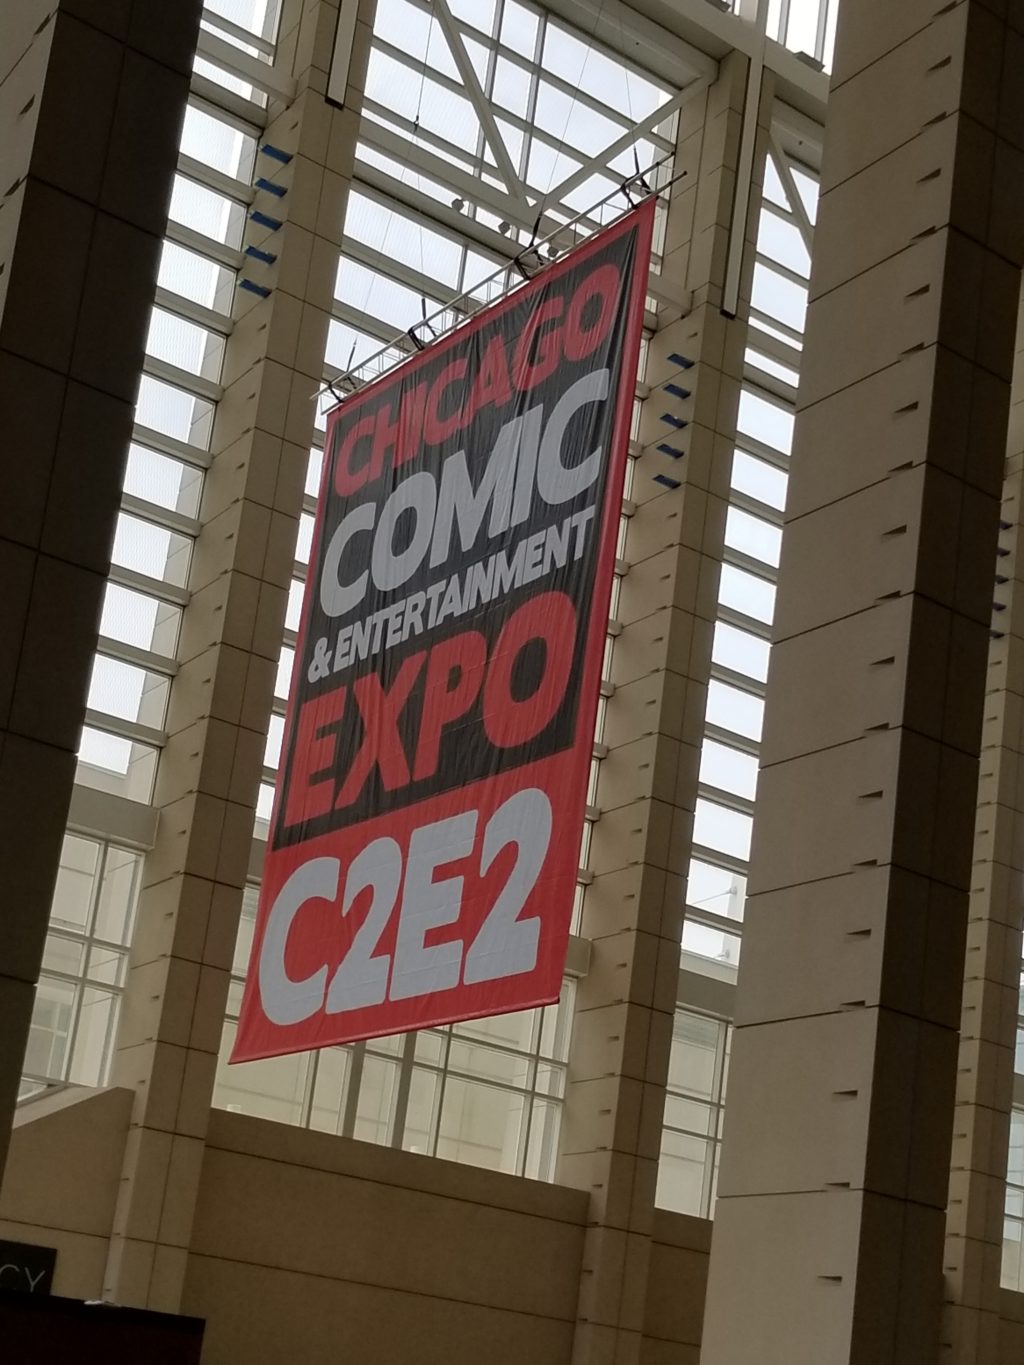 C2E2 banner in the McCormick Place hall